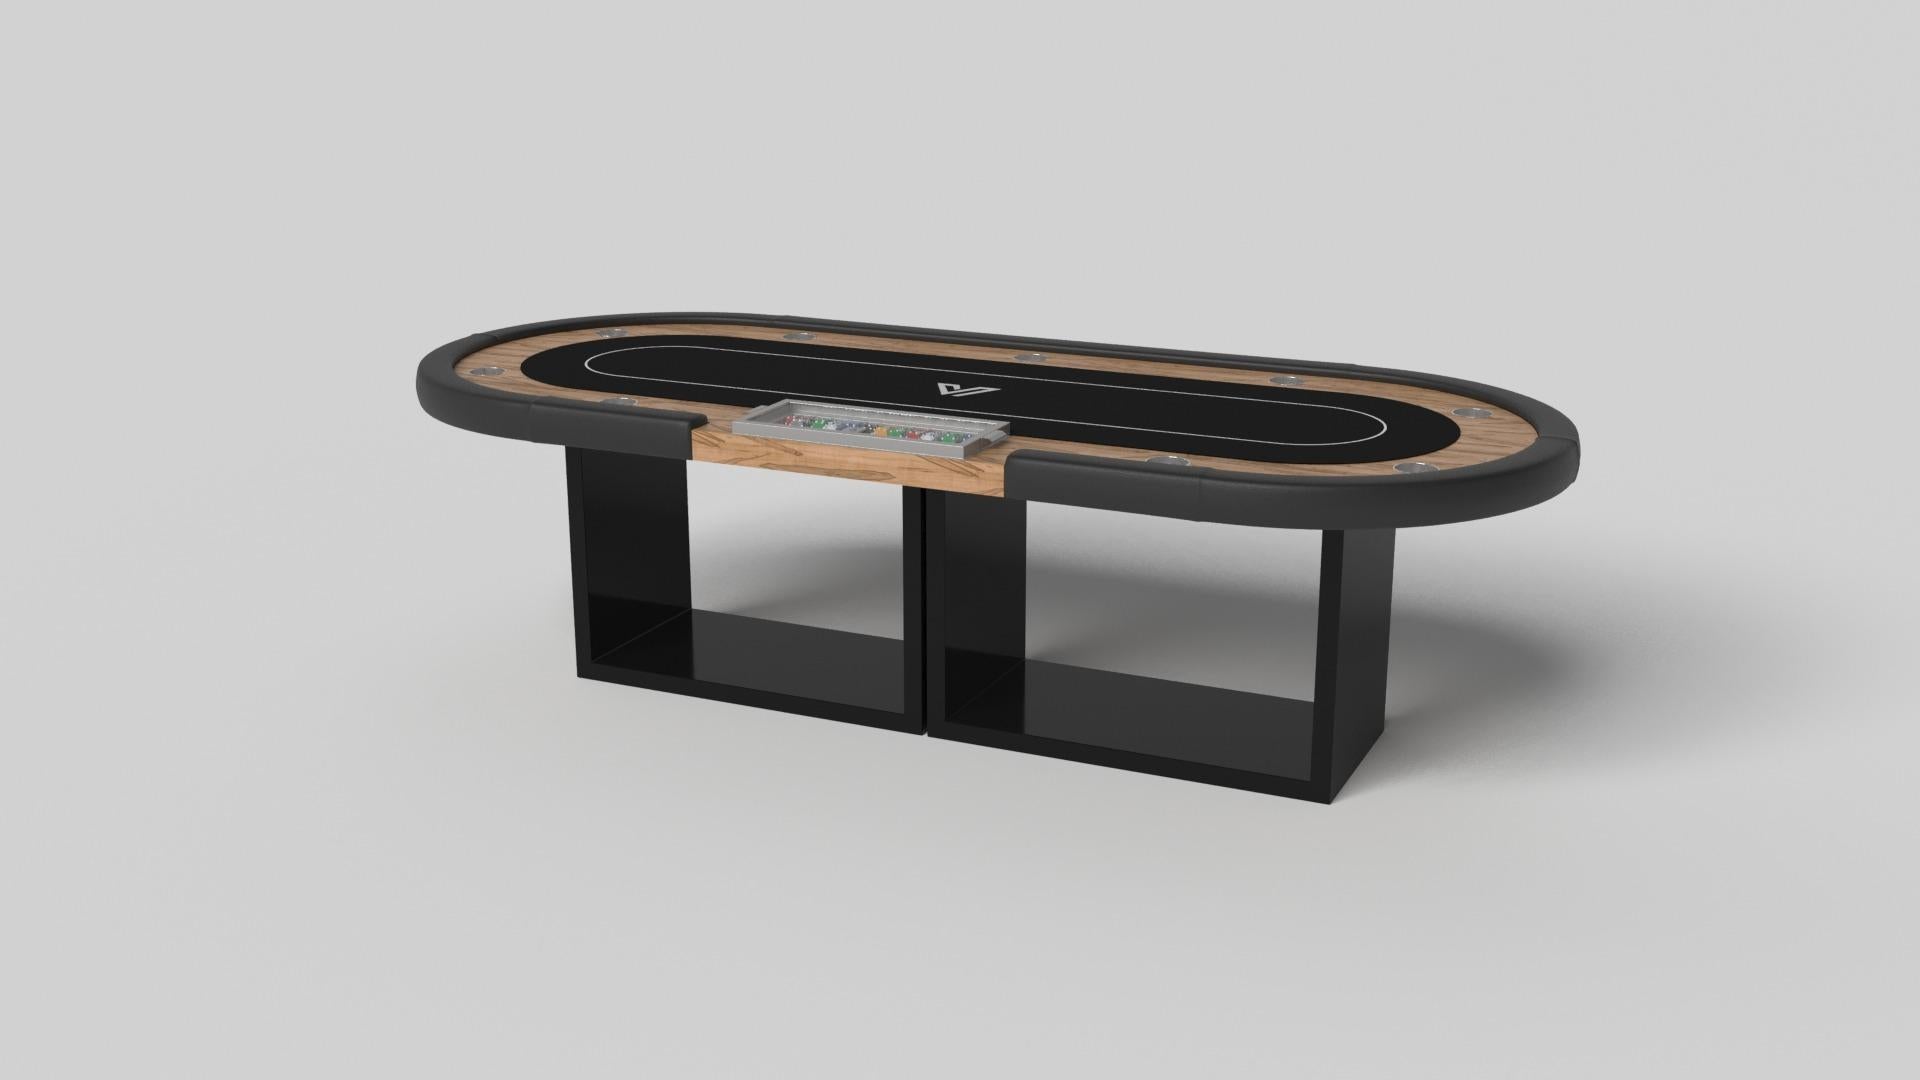 Supported by two rectangular open pedestals as the base, this handcrafted shuffleboard table is modern and minimalistic with its combination of simple, geometric forms. Viewed from the front, the use of negative space is evident; viewed from the